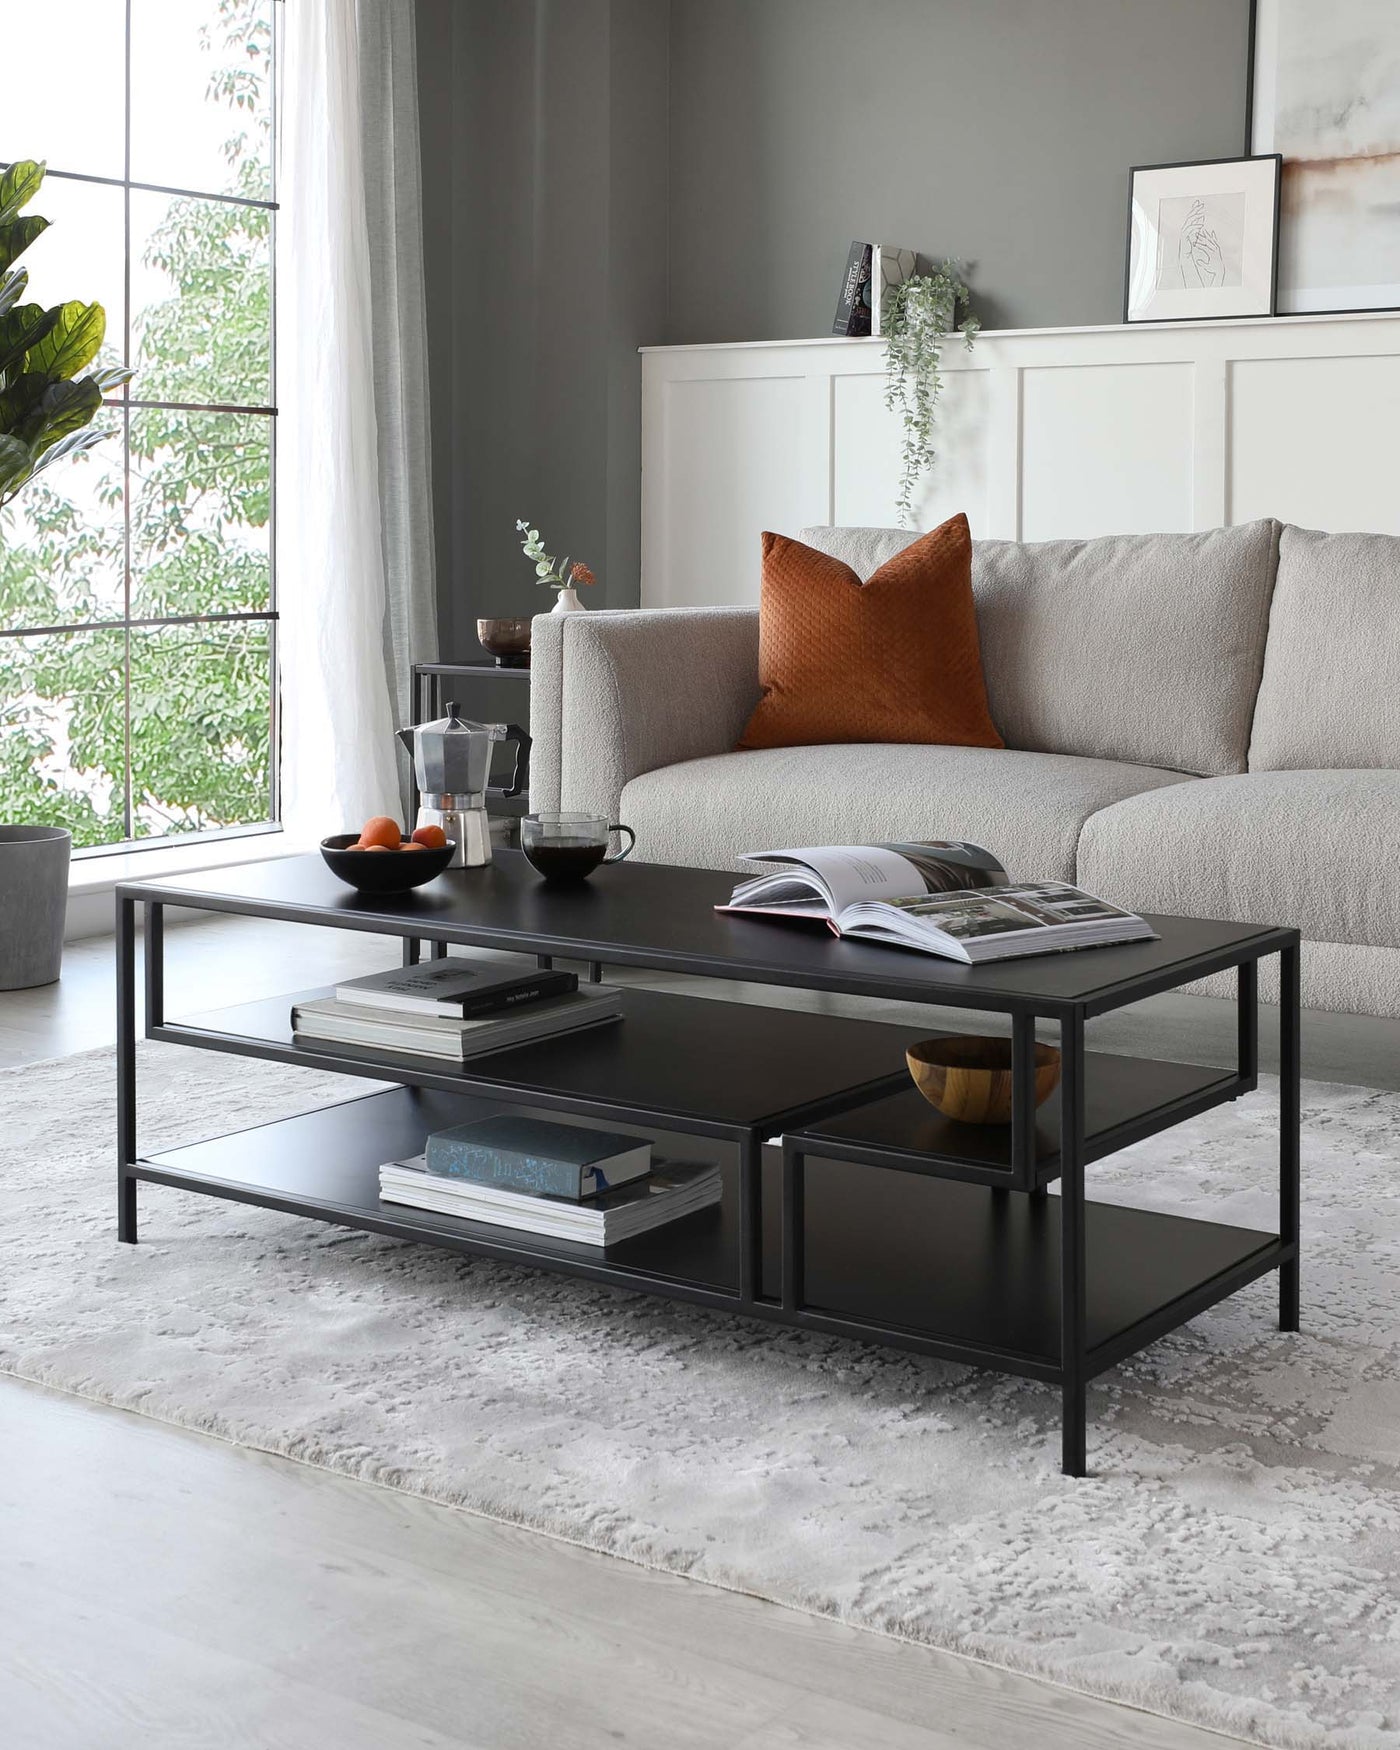 Modern living room featuring a minimalist, rectangular coffee table with a matte black metal frame and a sleek black tabletop. The table includes a lower tier with additional shelving space for books and decorative items. Gray textured sofa with a burnt orange throw pillow complements the table, both positioned on a light grey plush area rug. White credenza and artwork adorn the background, with natural light streaming through sheer curtains.